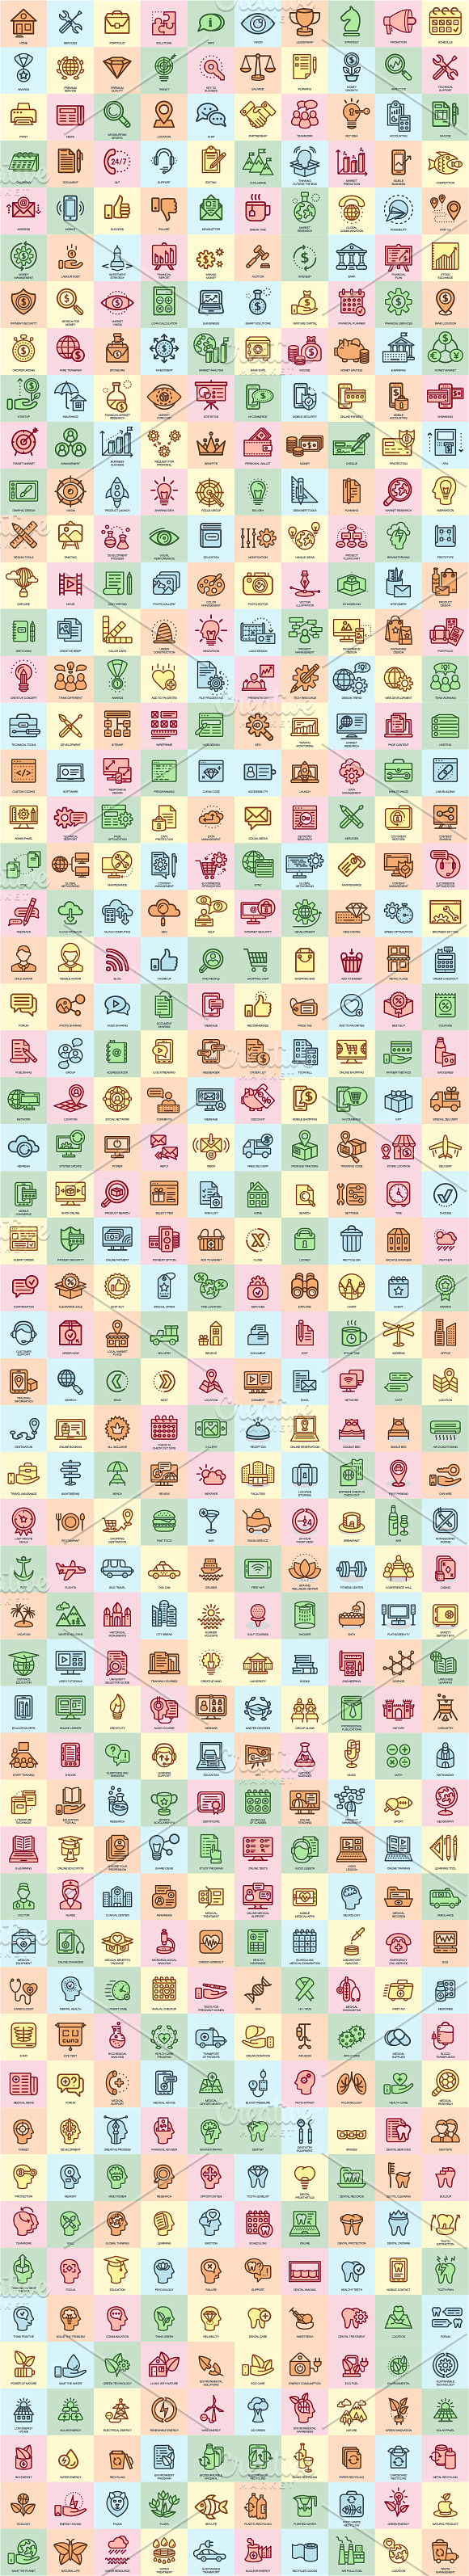 6700+ Line Icons Bundle in Icons - product preview 11